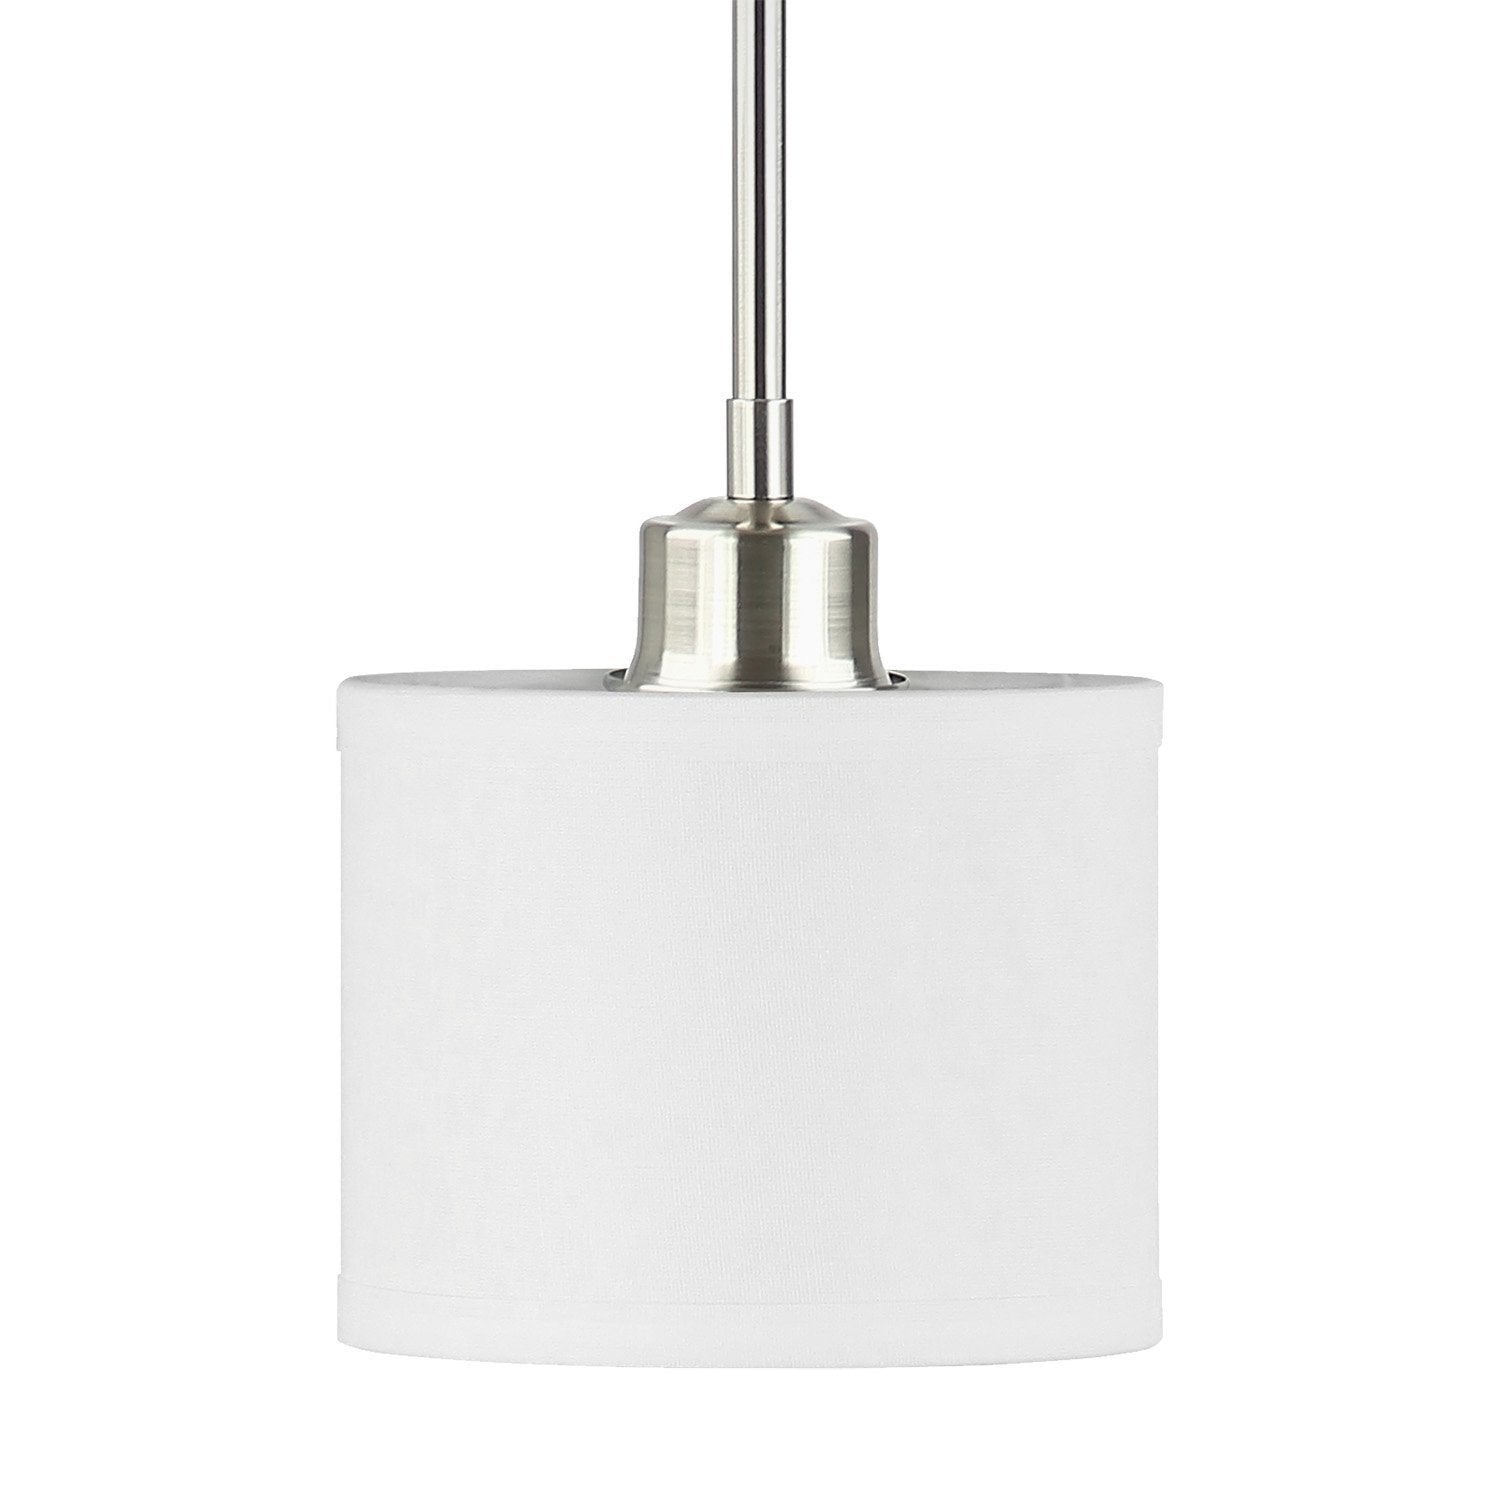 Molto Brushed Nickel Stem Hung One-Light Pendant Lamp with Fabric Drum Shade